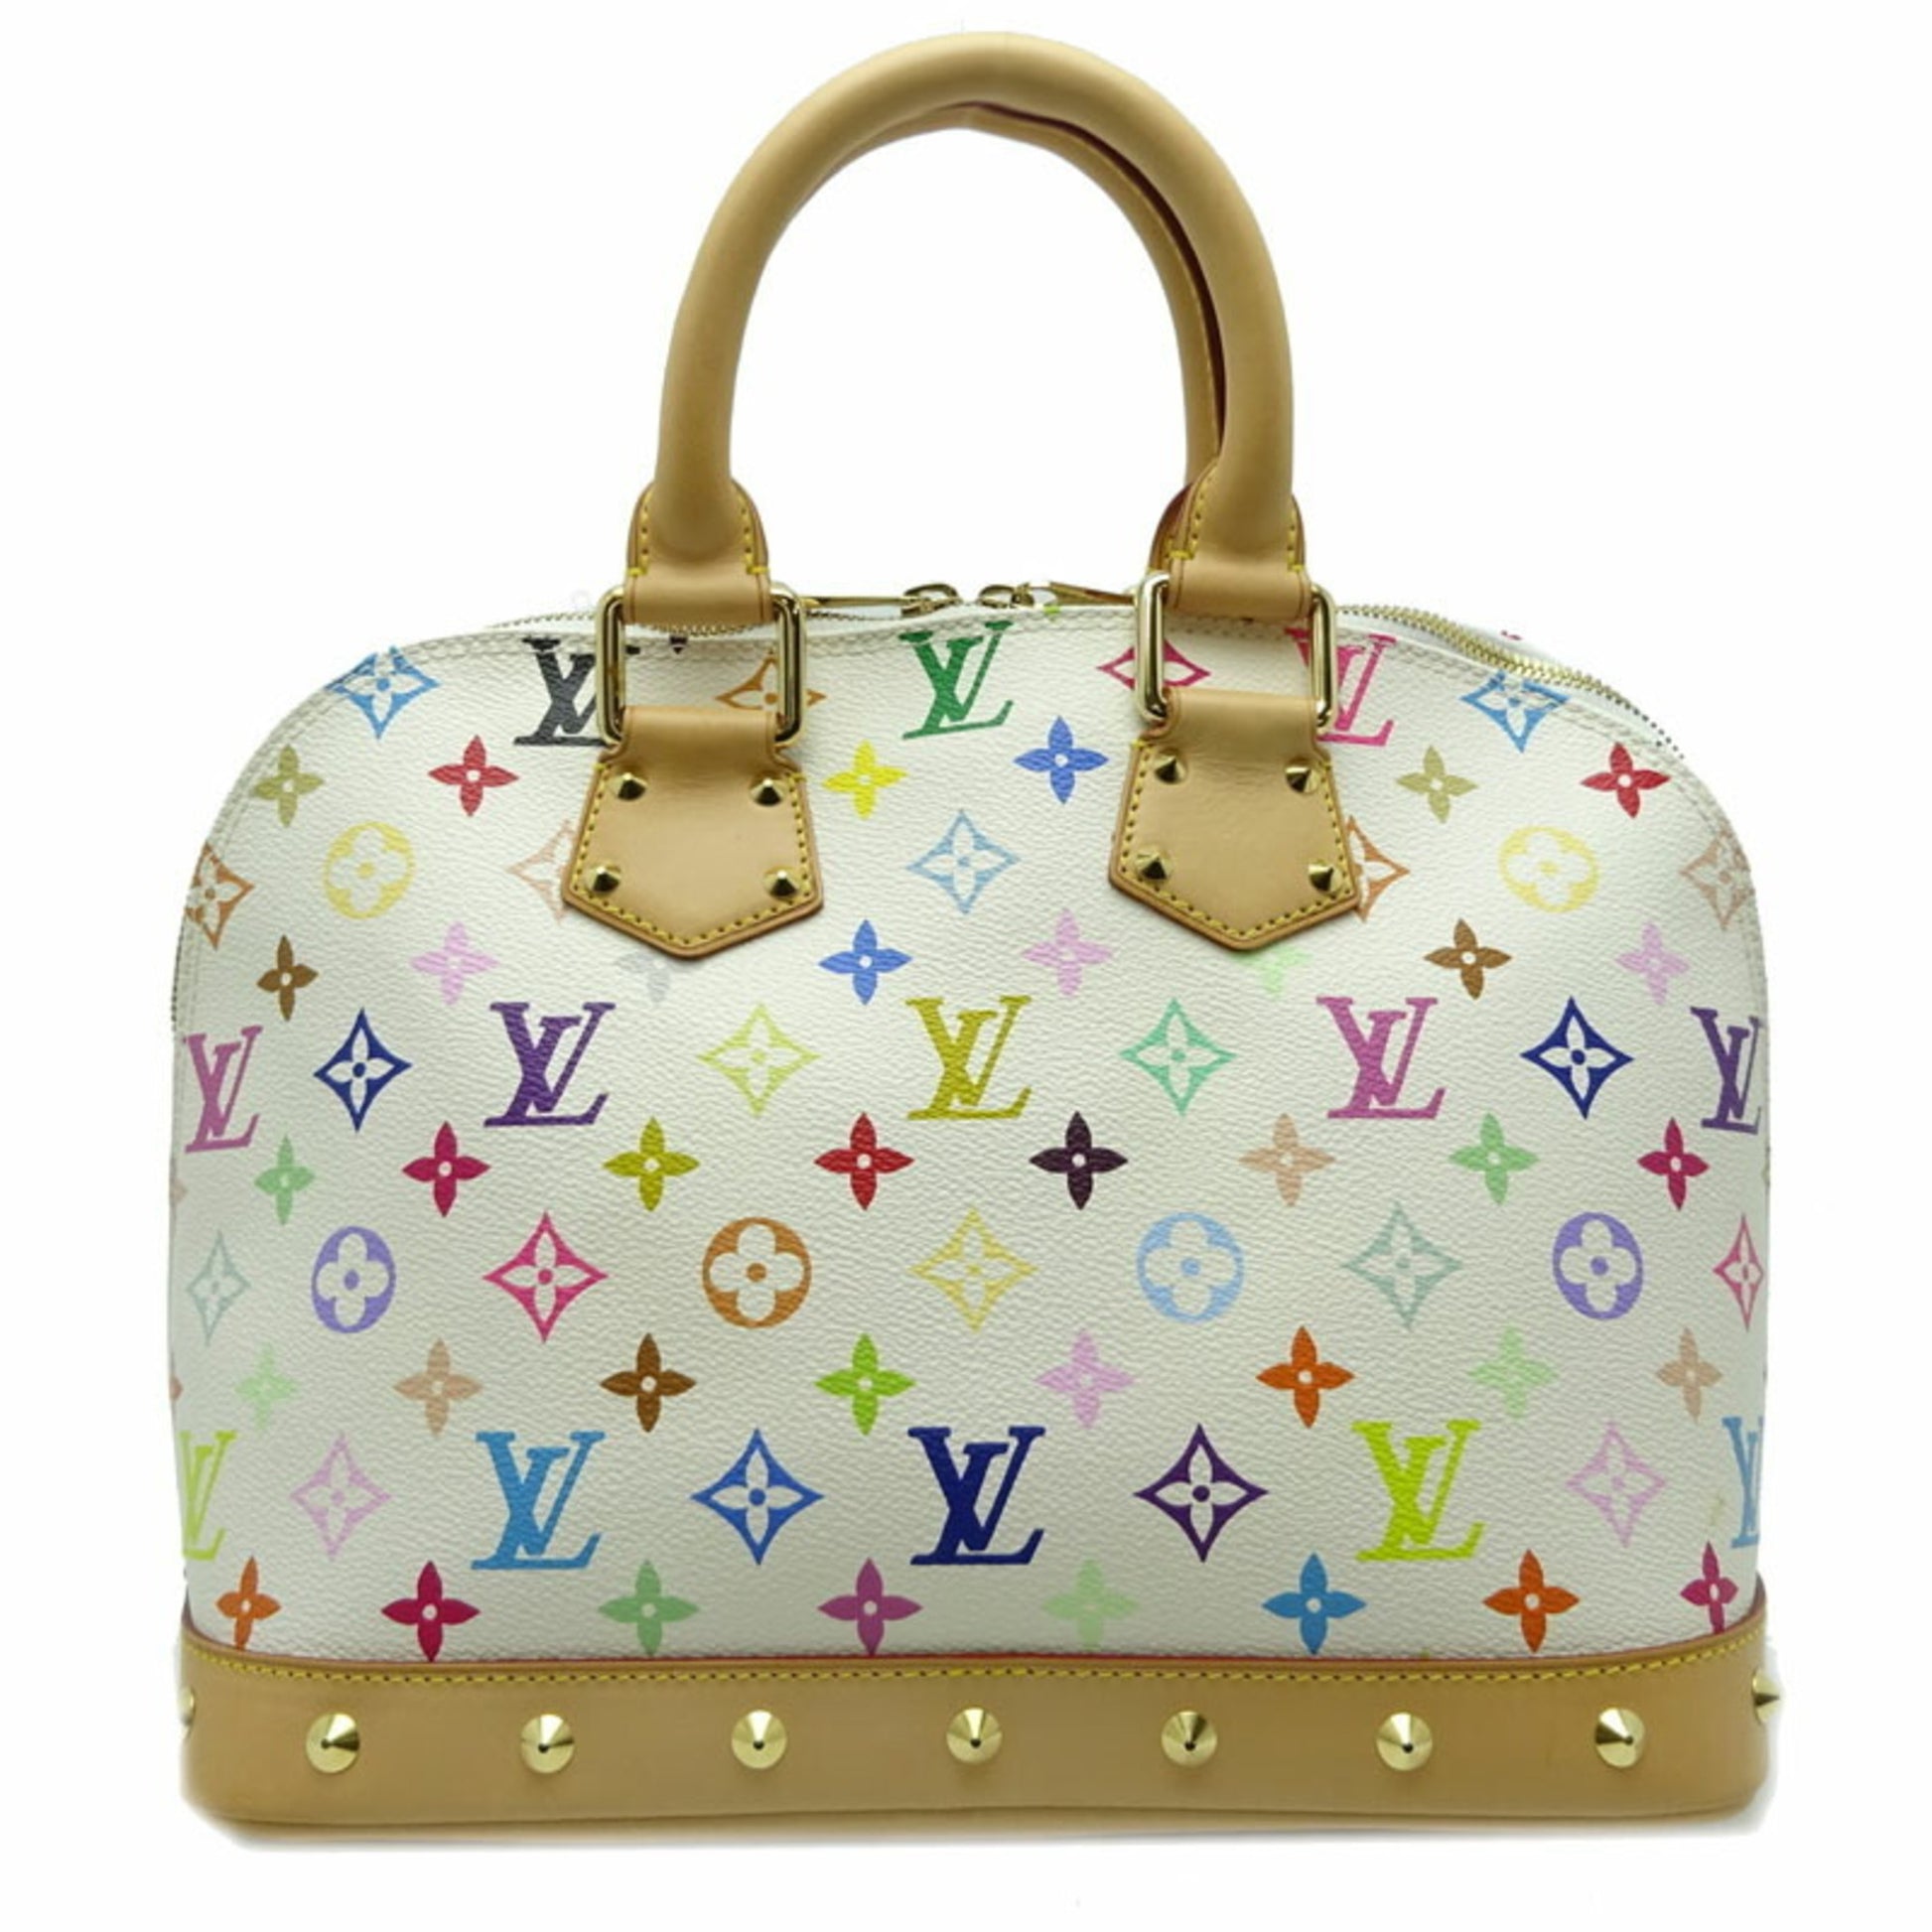 Unveiling My Louis Vuitton Alma BB and Tips on Buying/Sourcing Luxury Goods